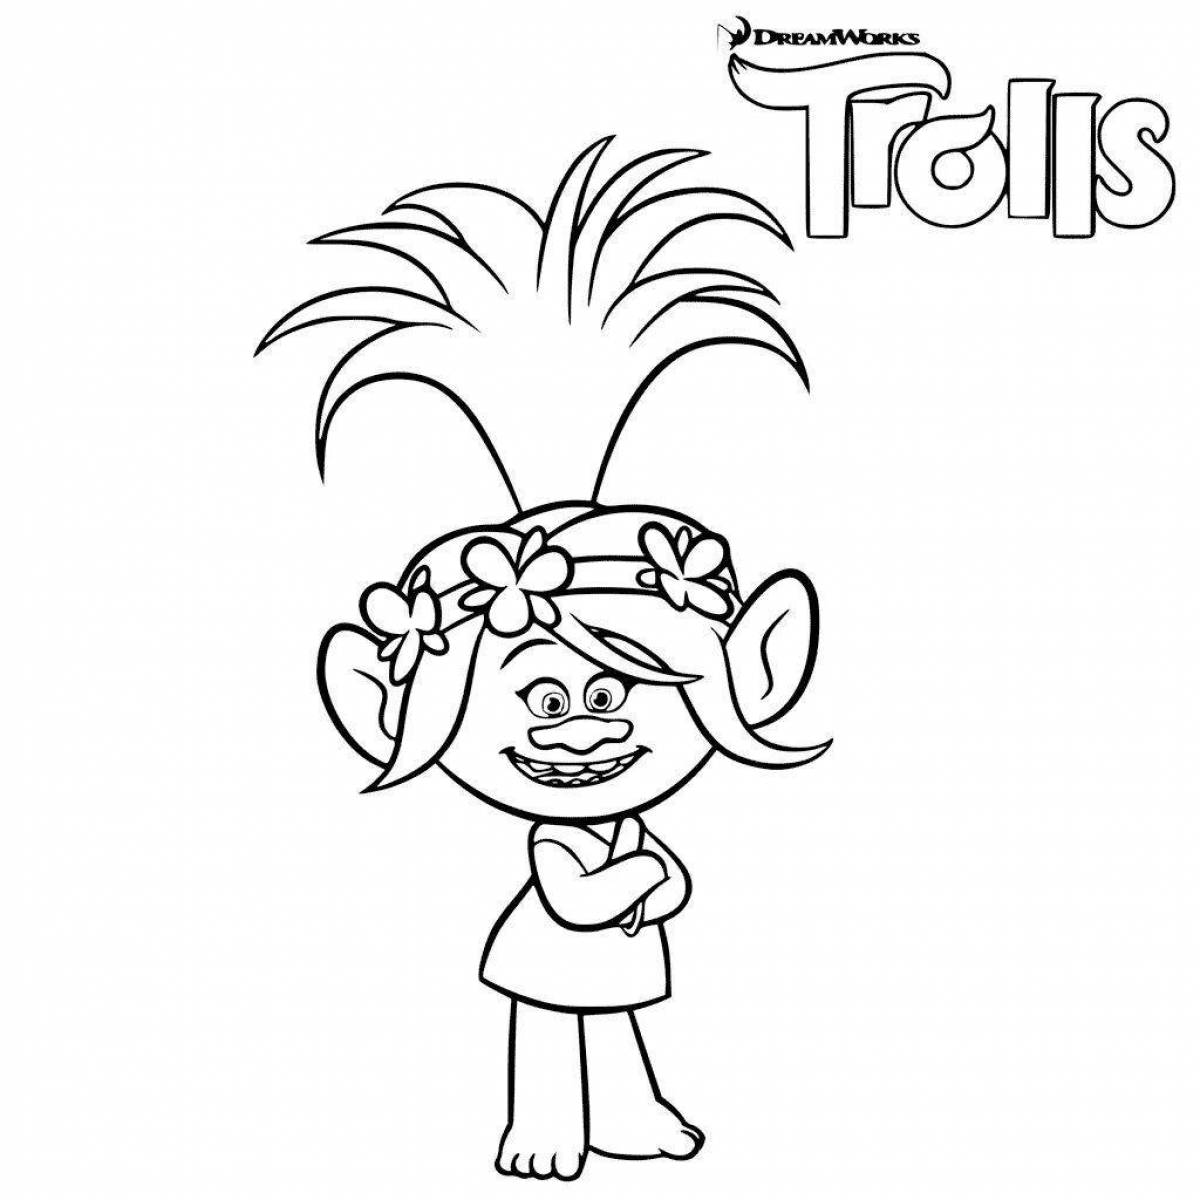 Amazing cartoon trolls coloring pages